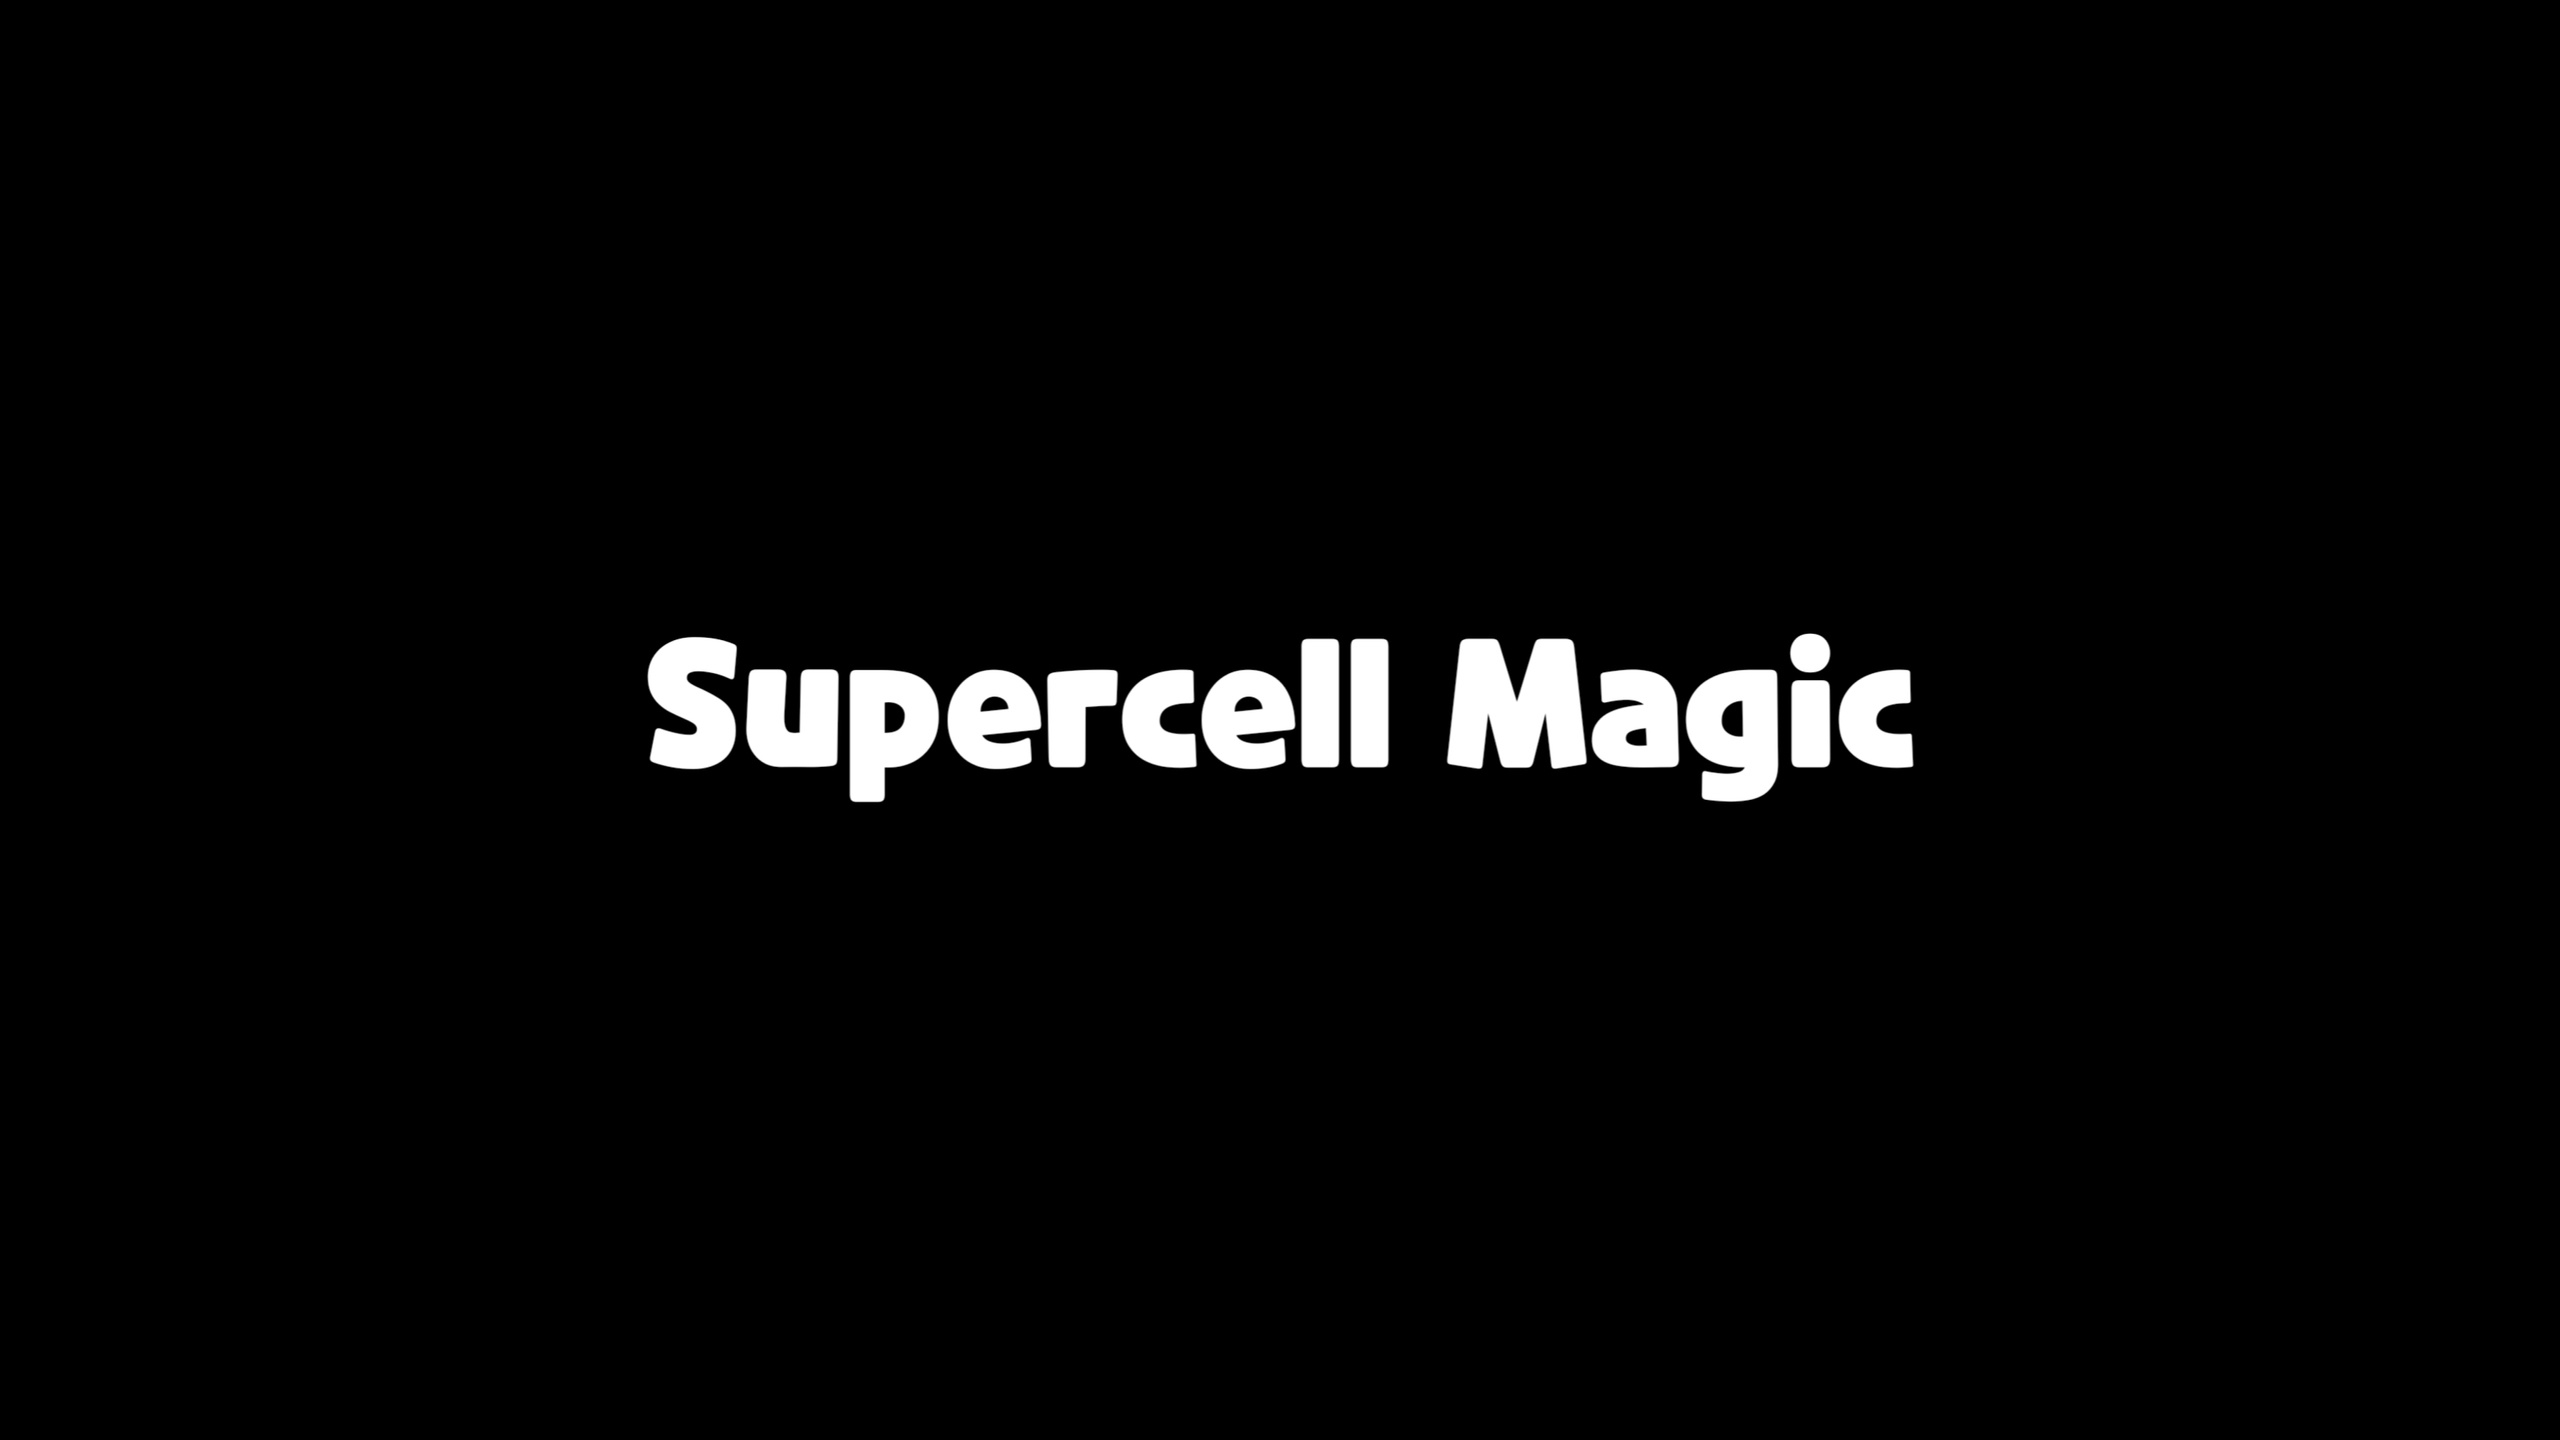 Police SUPERCELL MAGIC